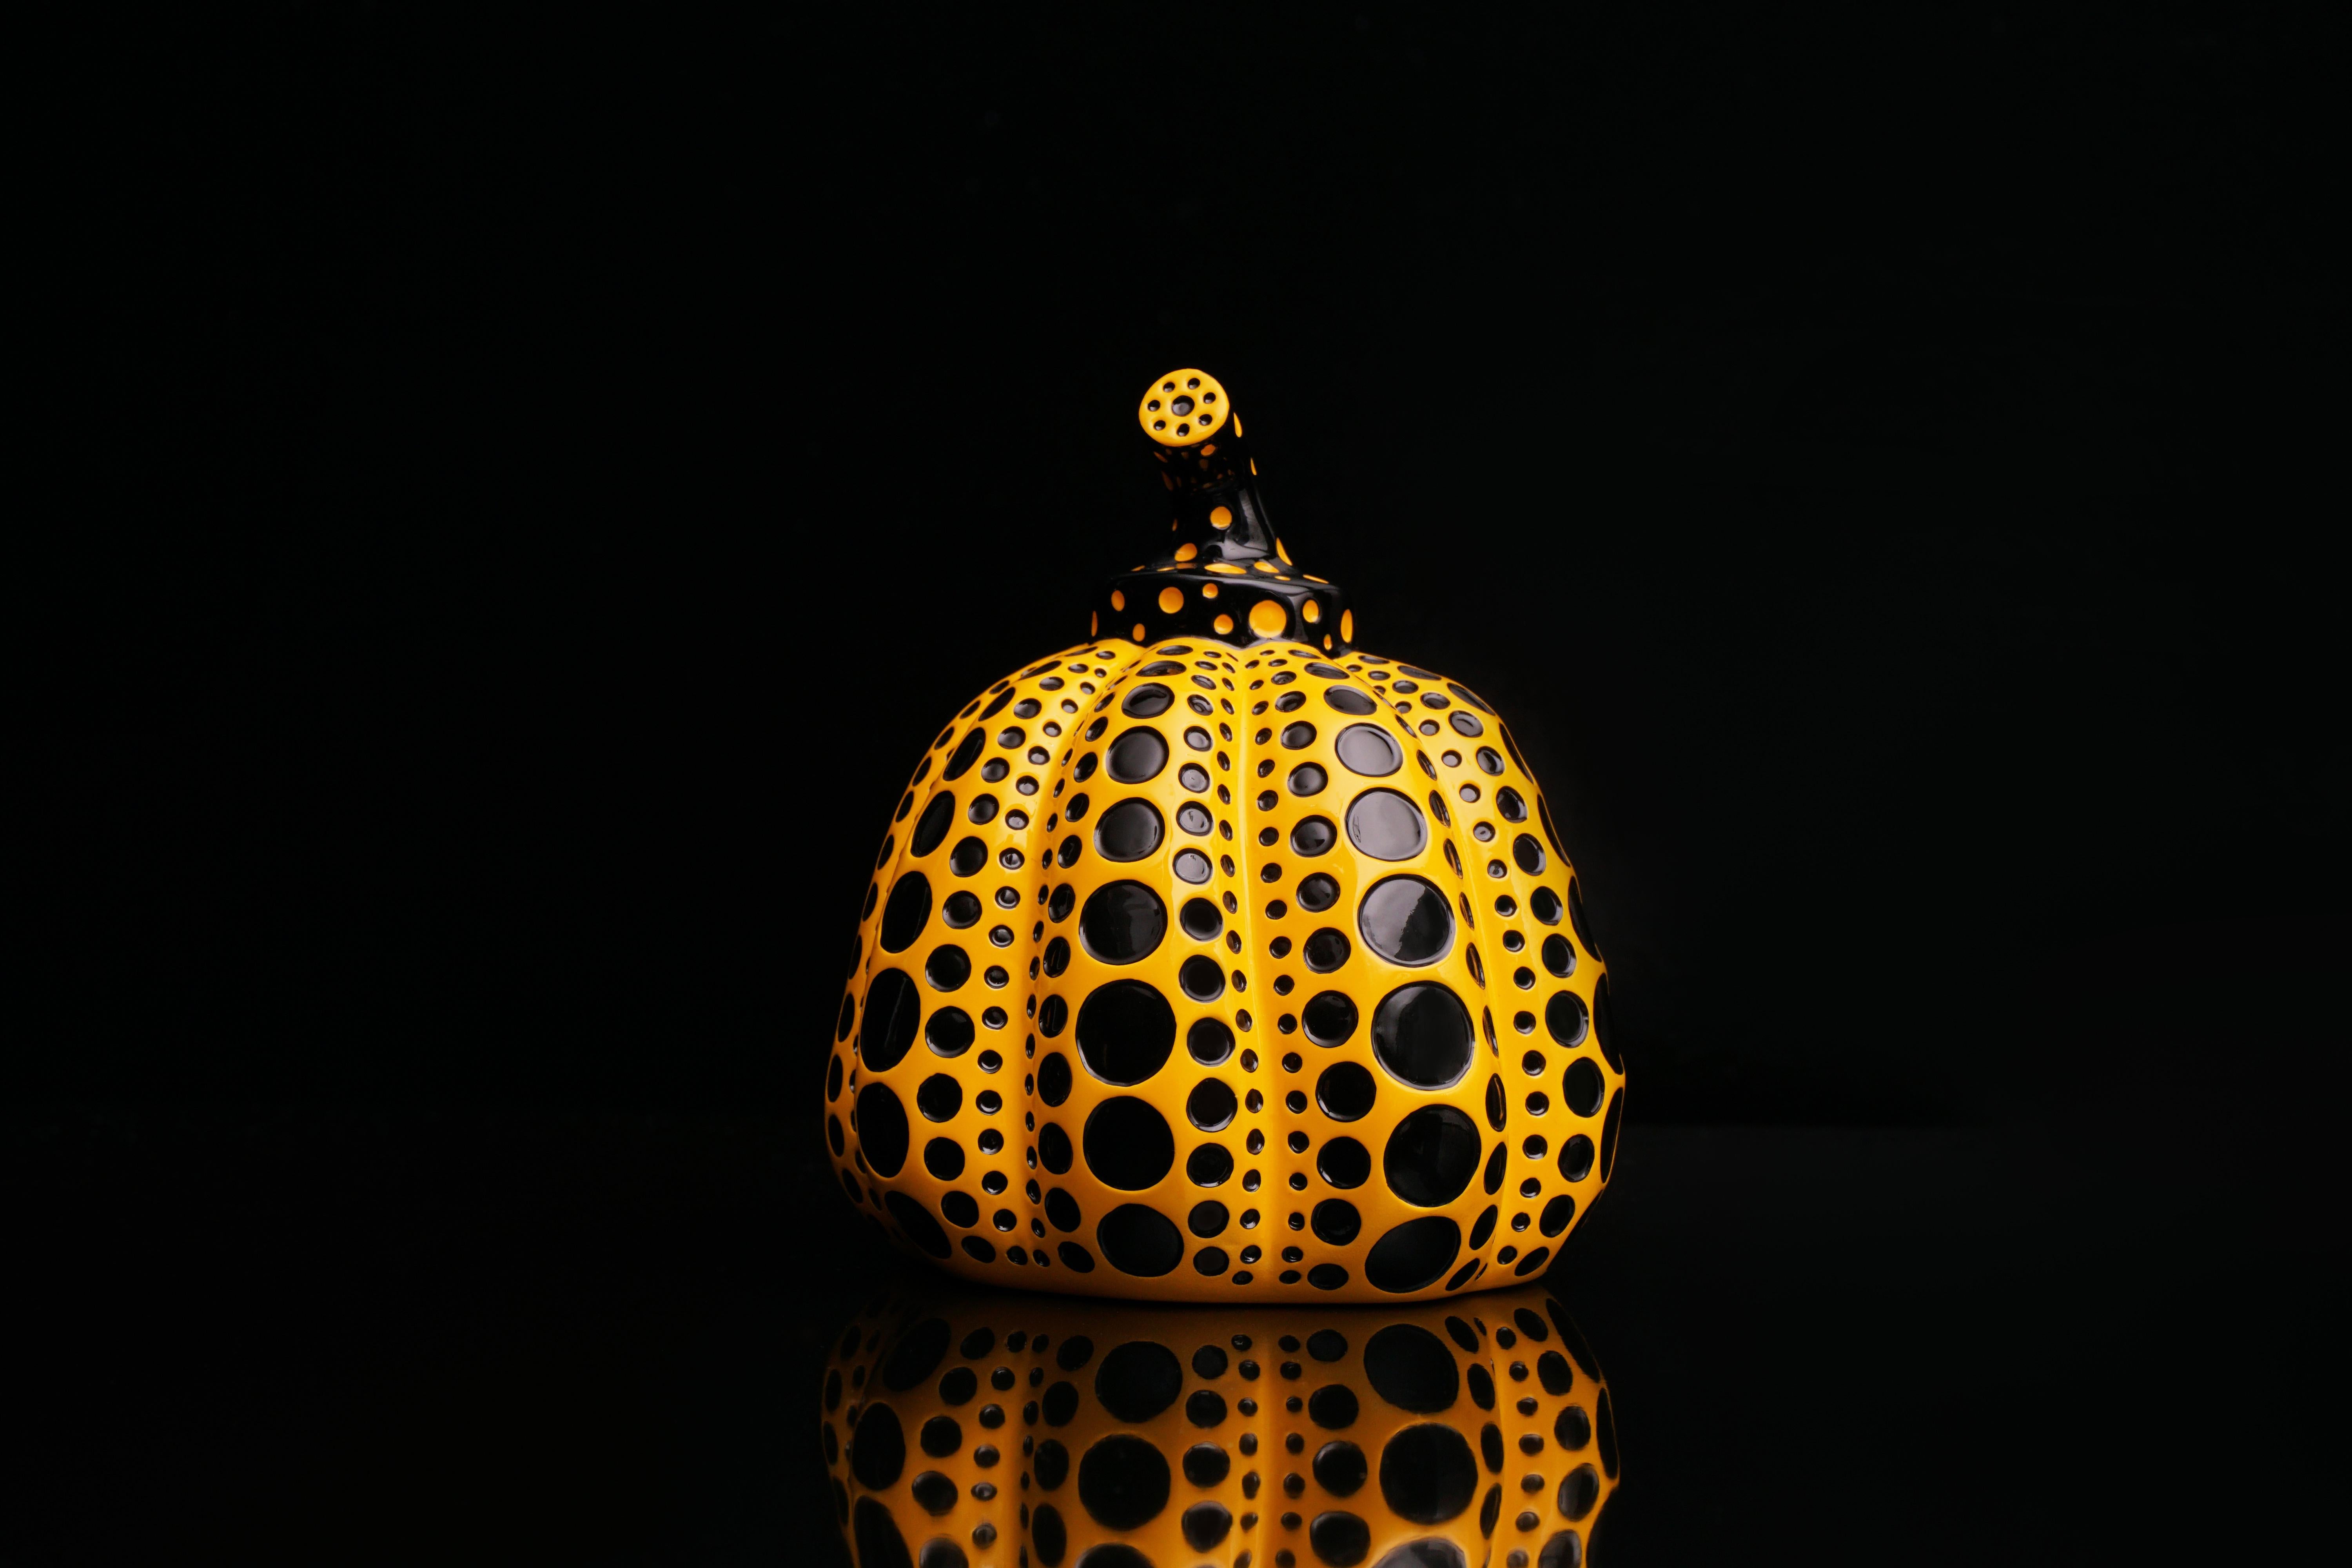 The ’Pumpkin' Set of Two sculptures are polka-dotted painted lacquer resin collectible art objects by the legendary contemporary Artist, Yayoi Kusama. Created in 2016, the polka-dot pumpkin series is a quintessential example of Kusama’s iconic